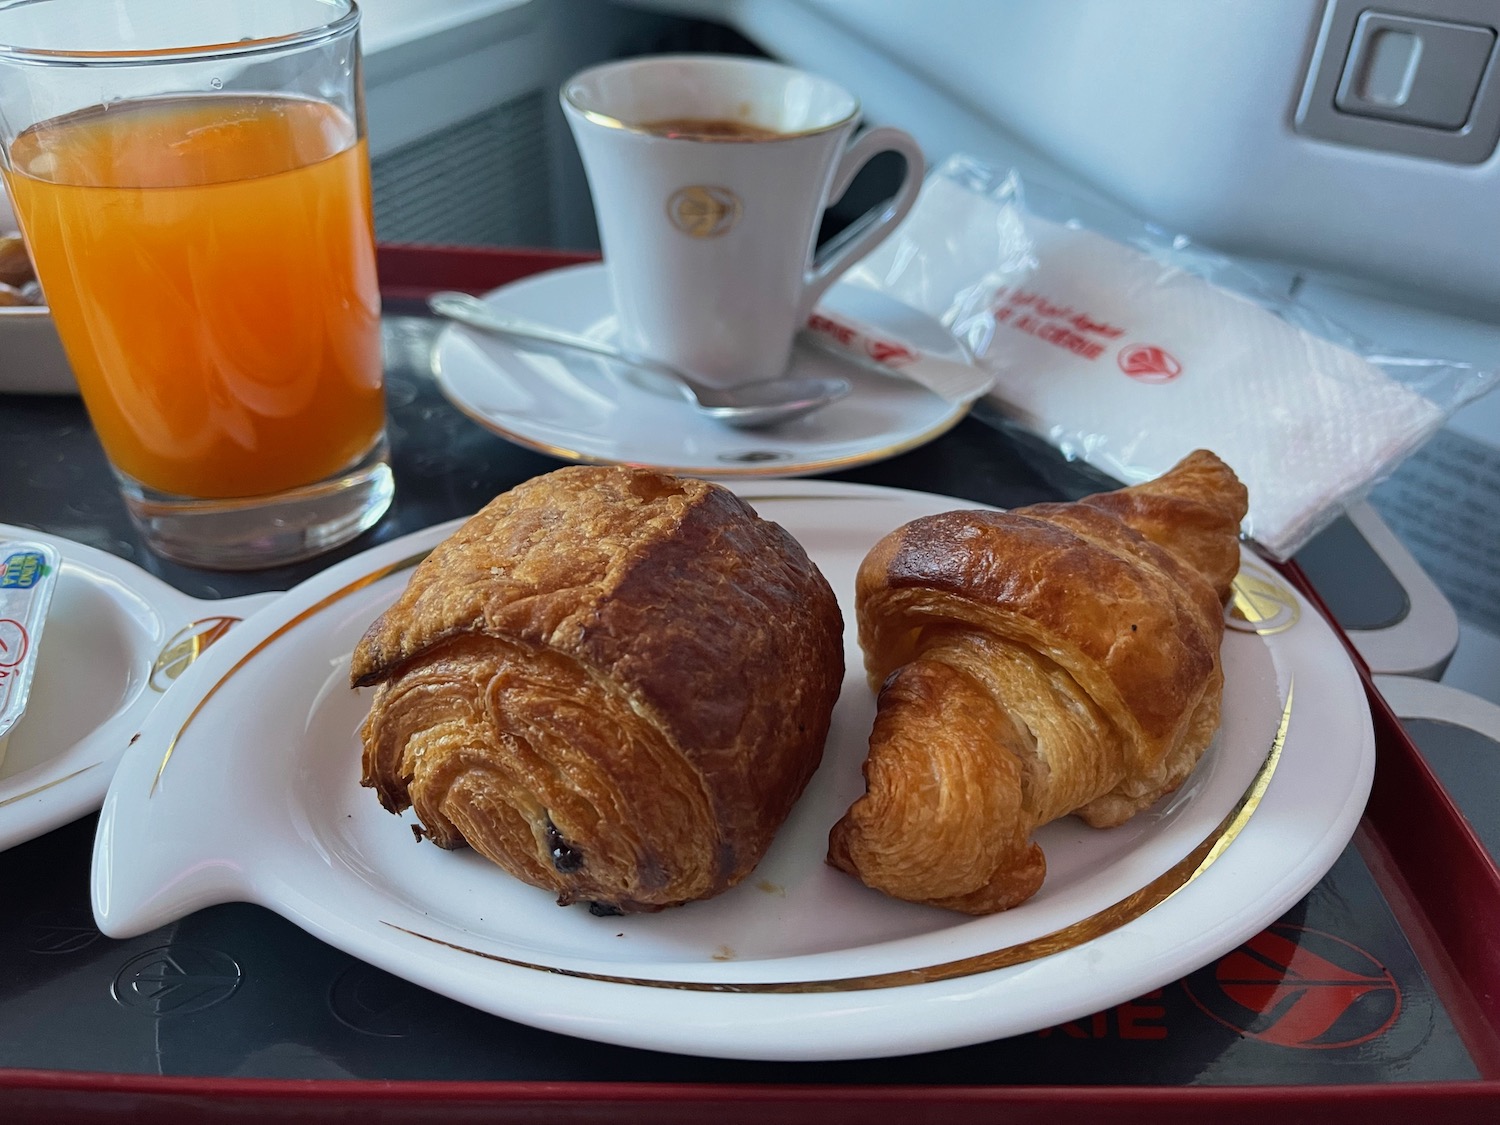 a plate of pastries and a cup of coffee